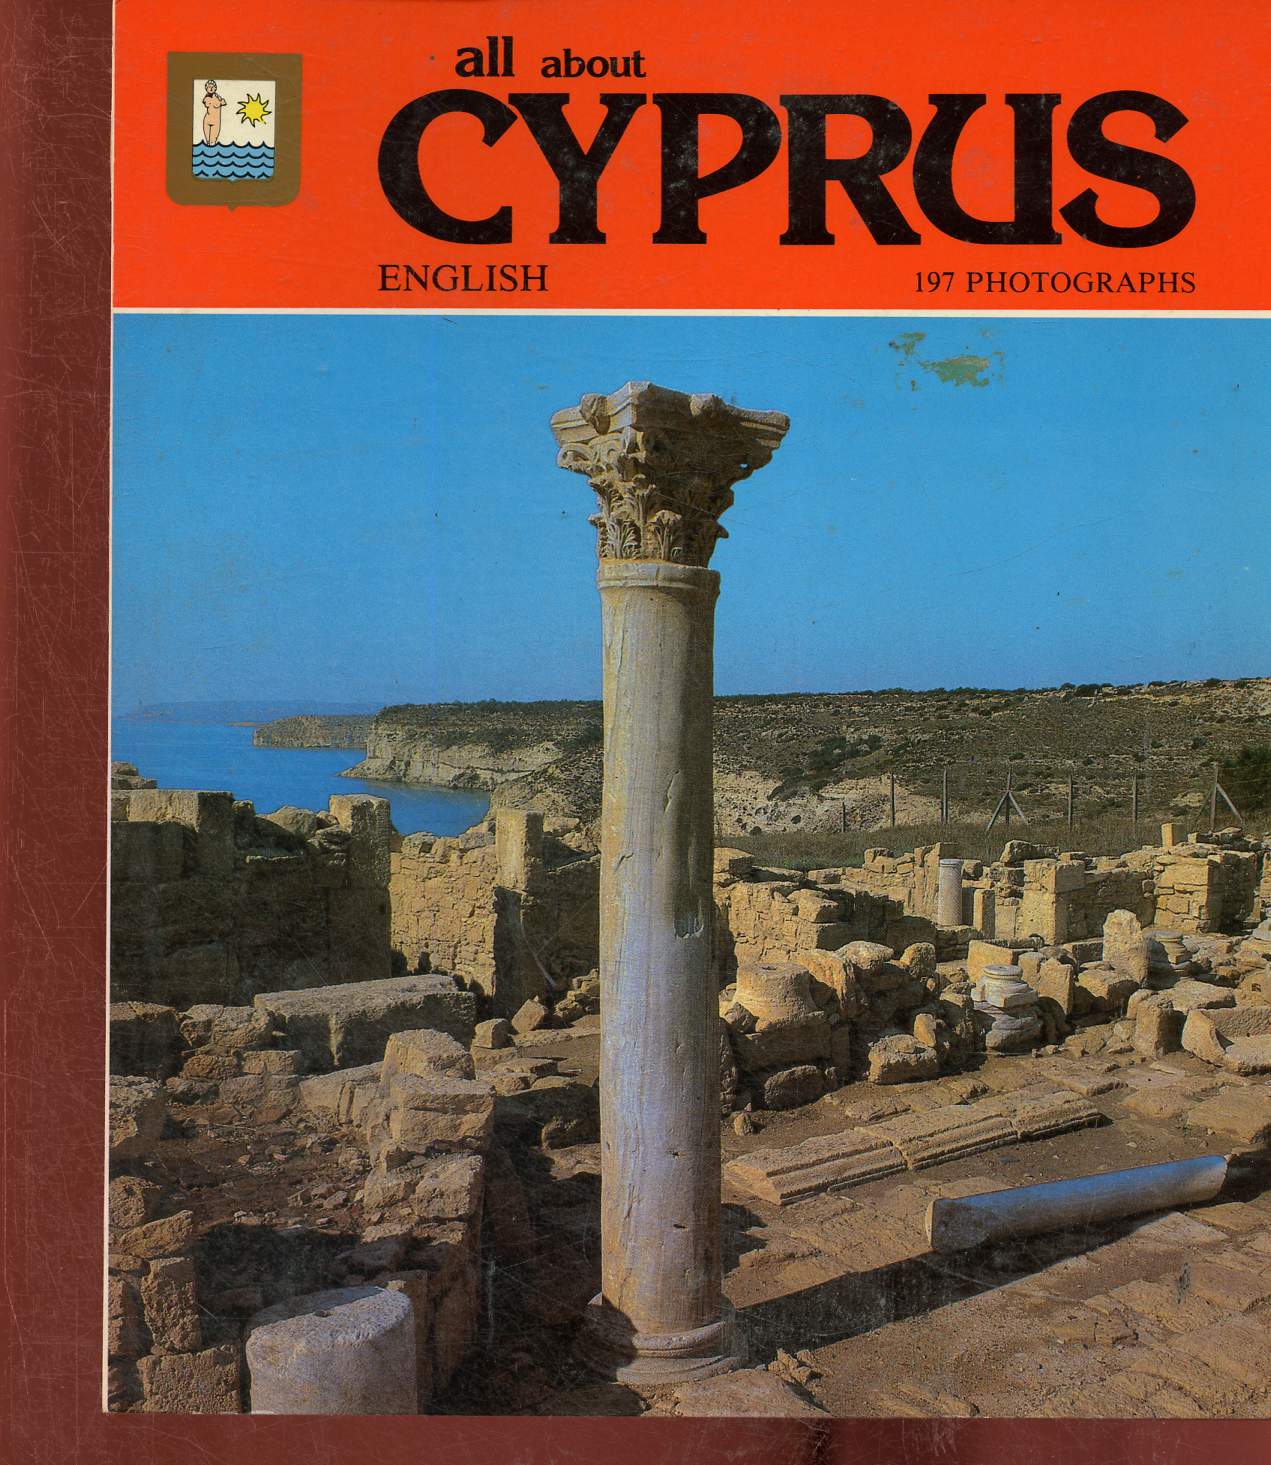 All about Cyprus. English. 197 photographs